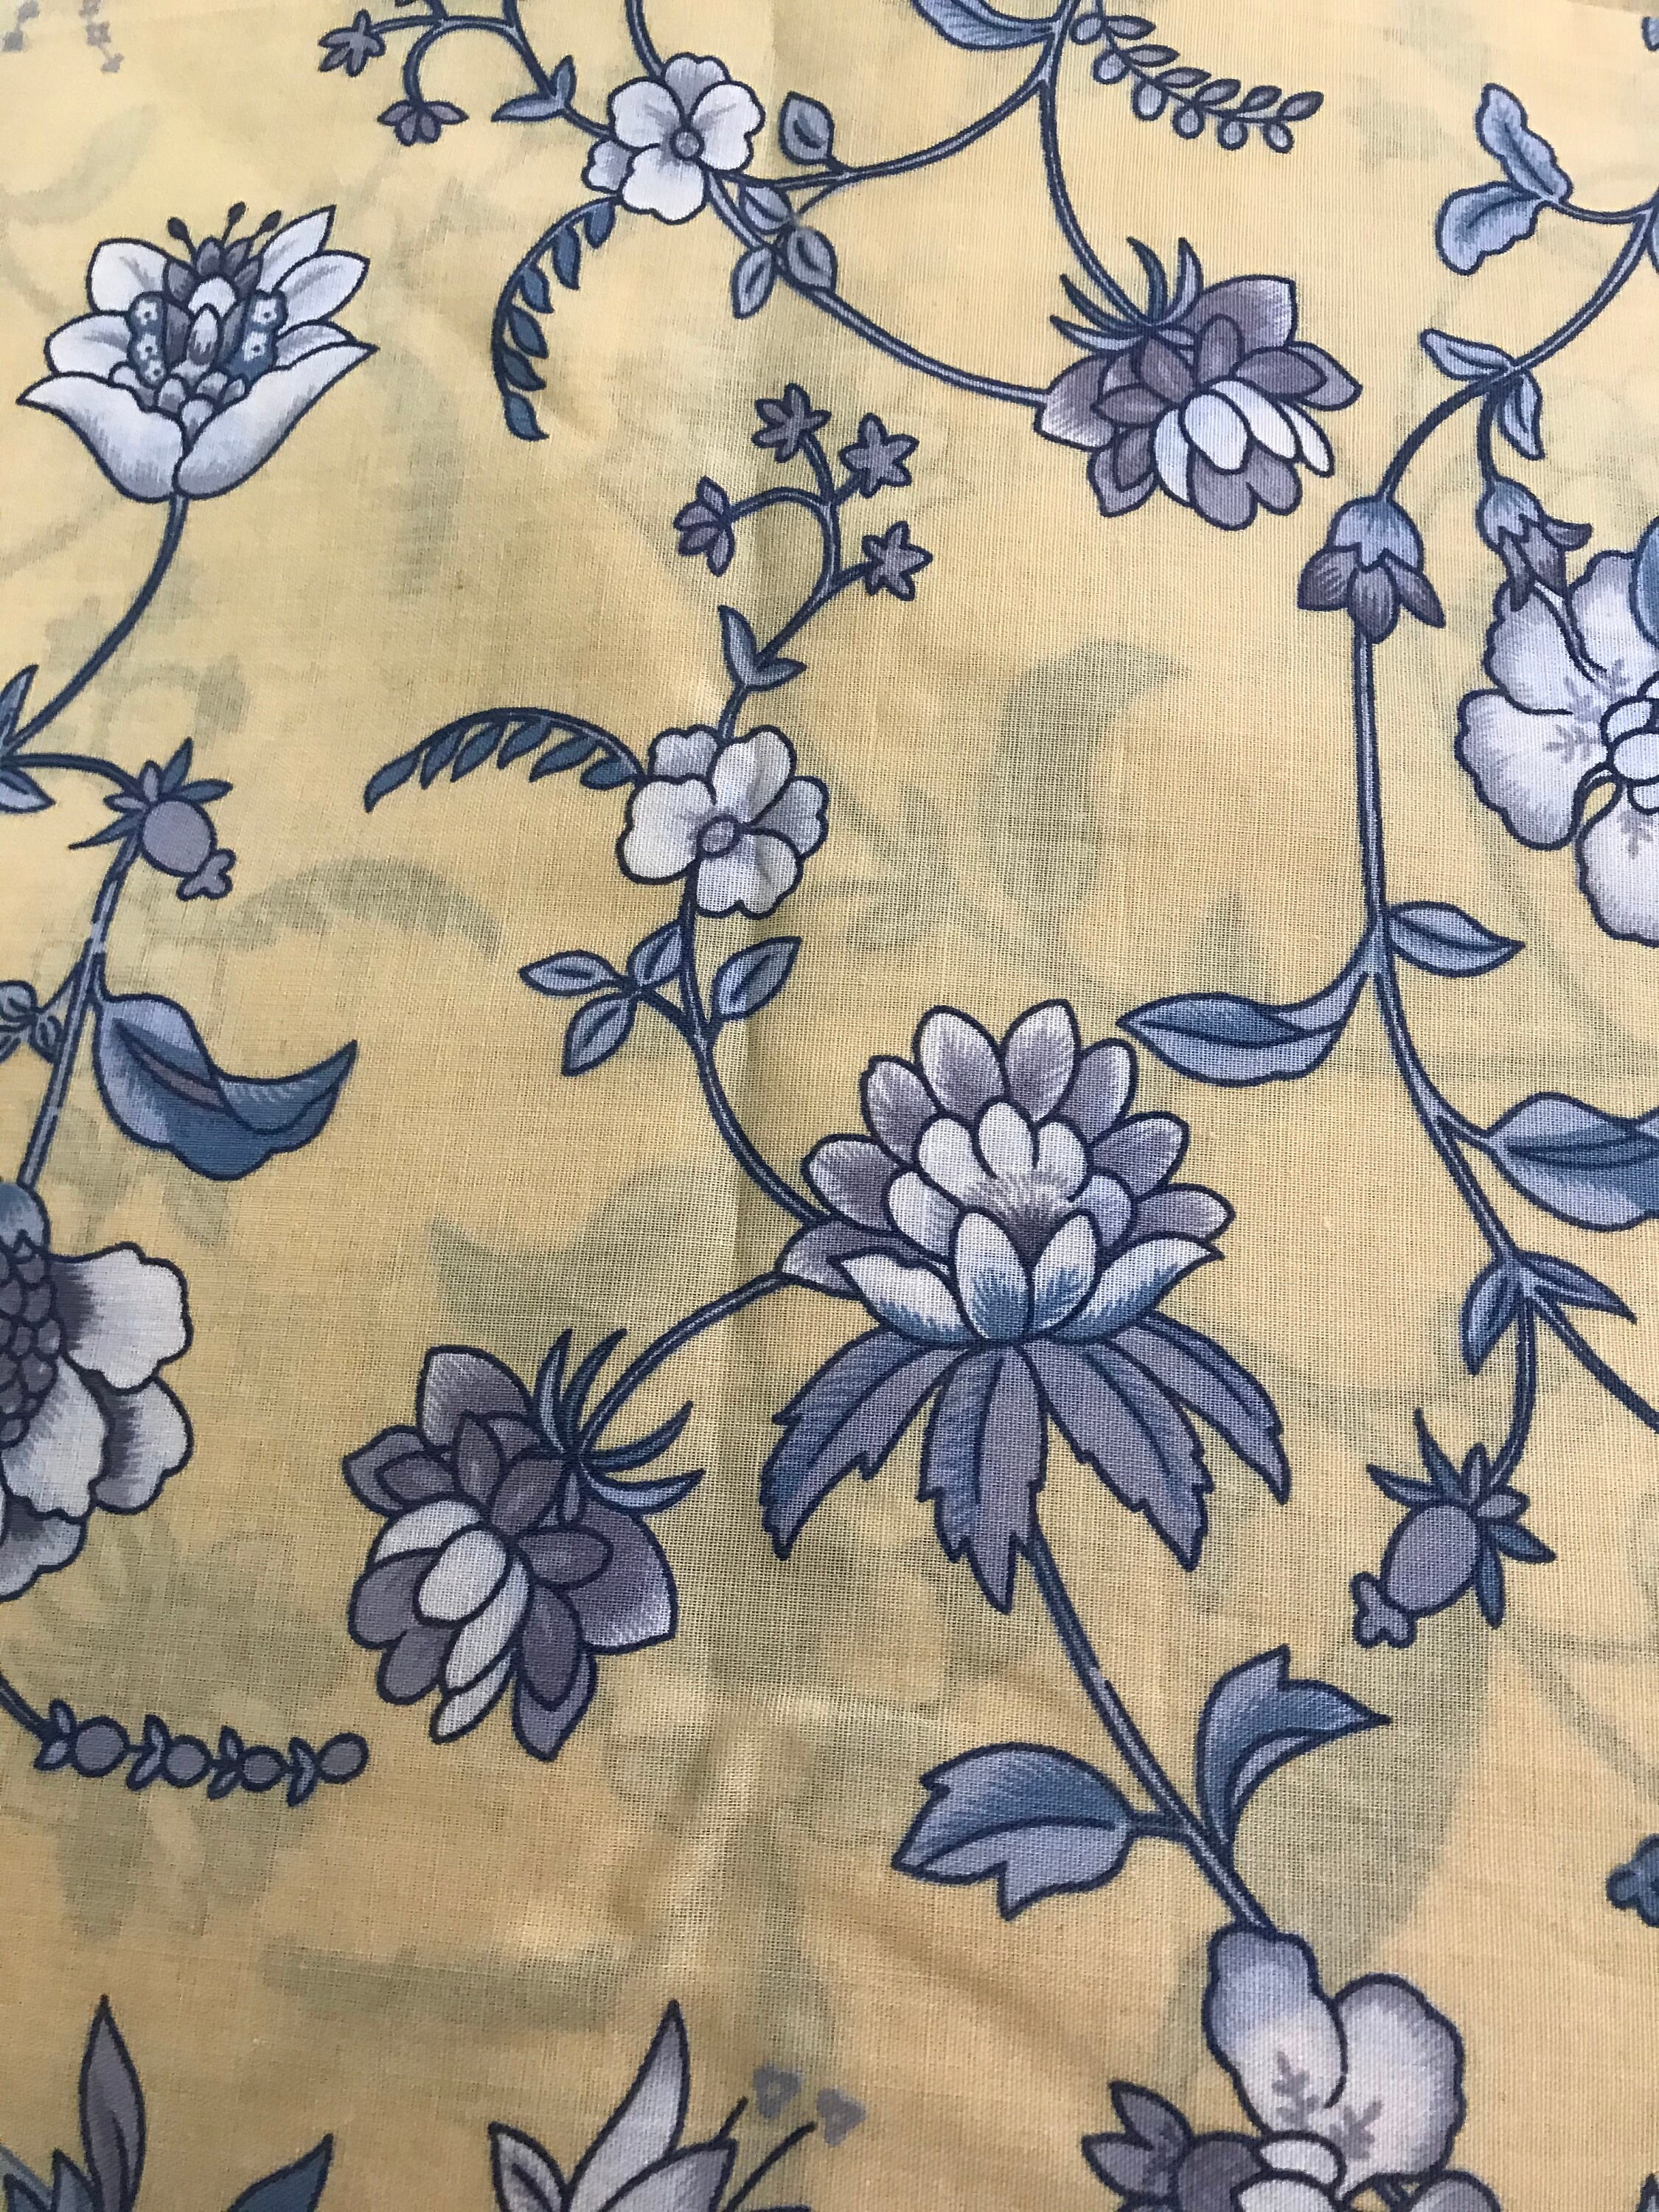 Vintage Blue and Yellow Cotton Floral Fabric | Etsy